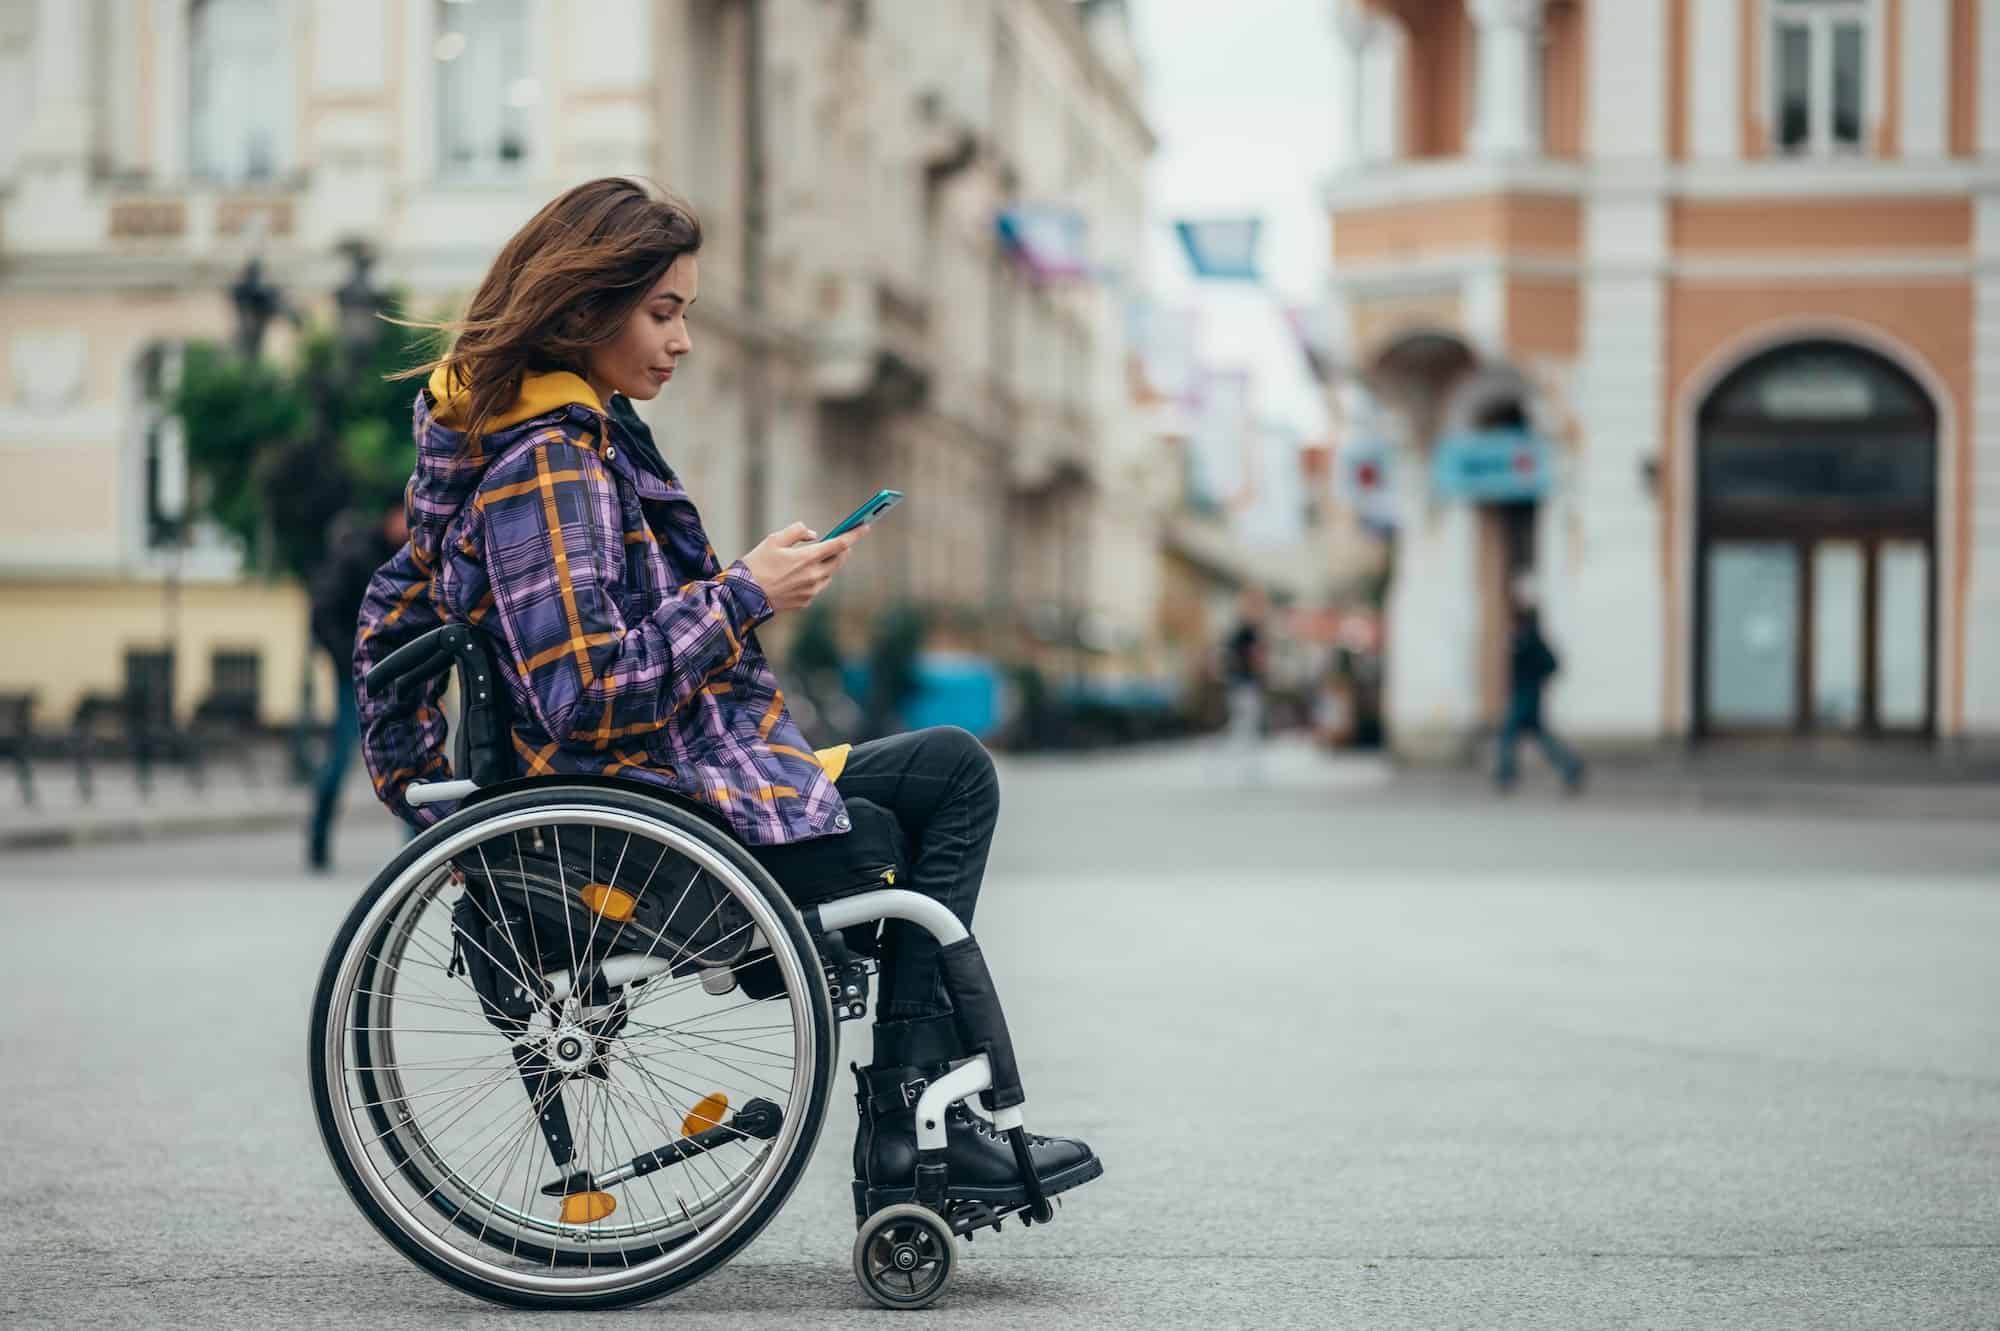 woman-with-disability-using-a-smartphone-while-out-in-the-city.jpg